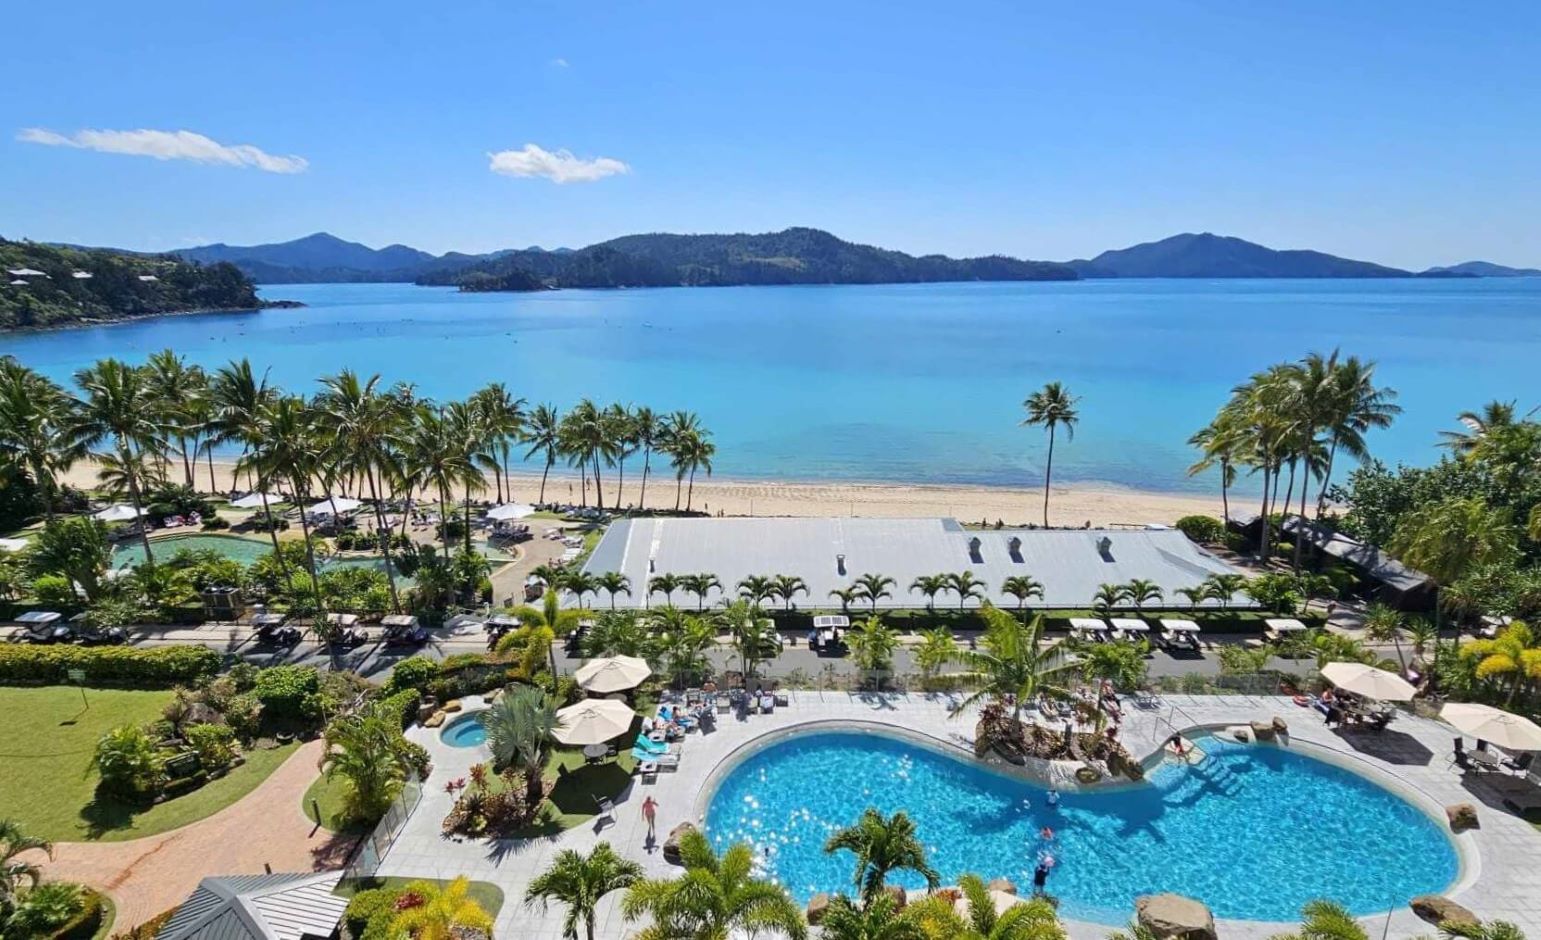 Things to do on Hamilton Island with children